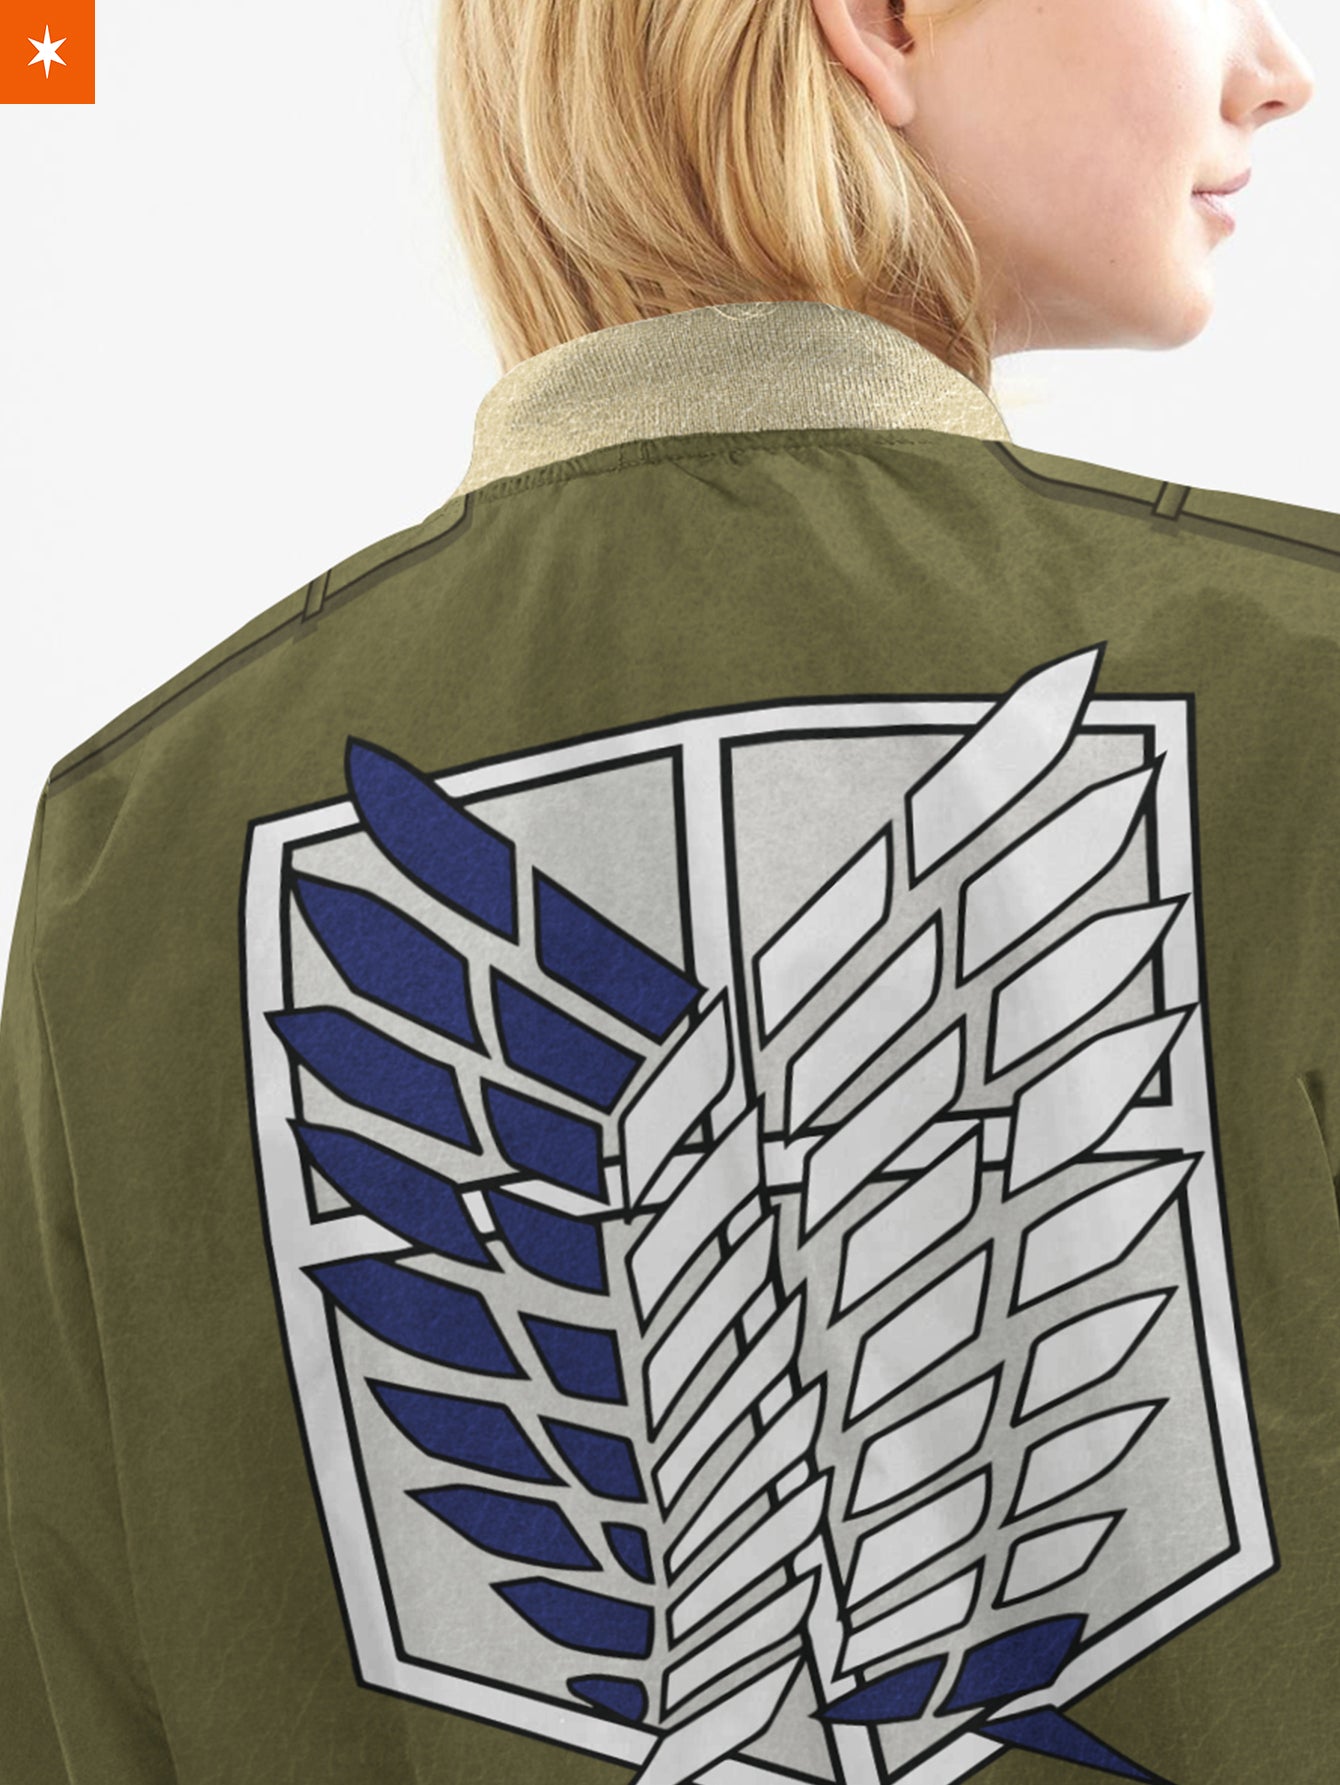 NYCC: Every Teen Is Wearing the 'Attack on Titan' Costume